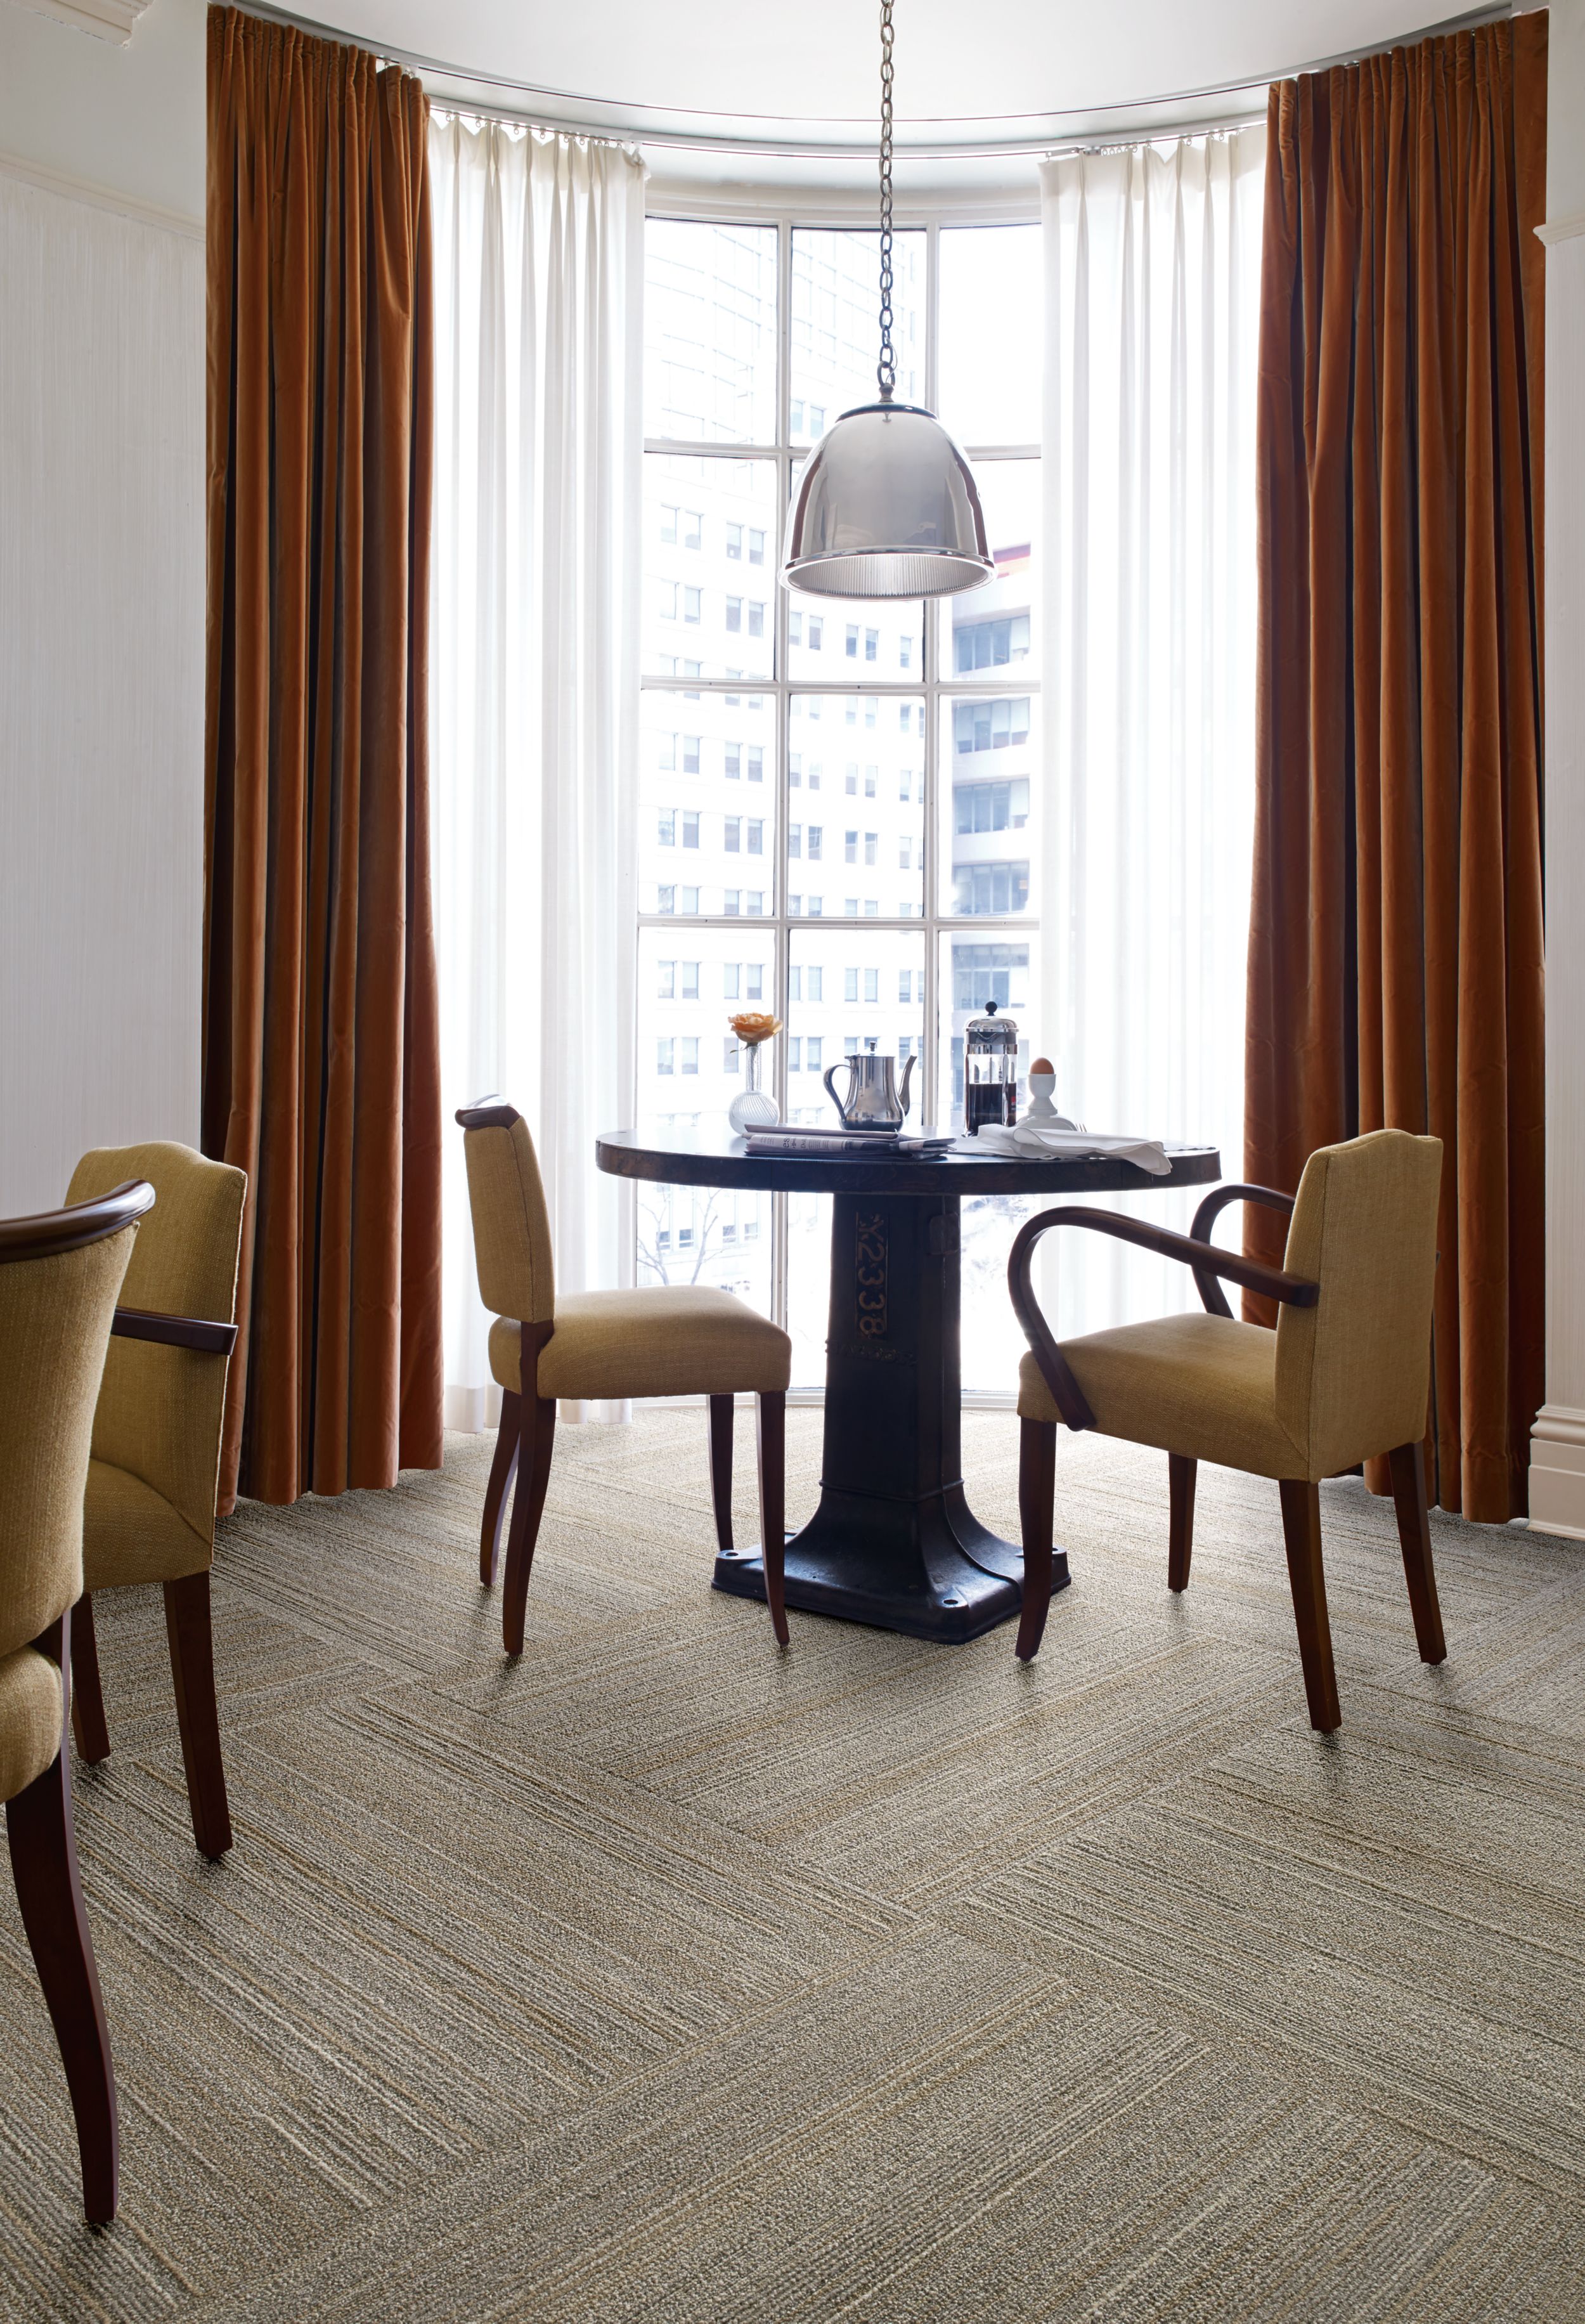 Interface NF400 plank carpet tile at small breakfast table in front of window Bildnummer 3